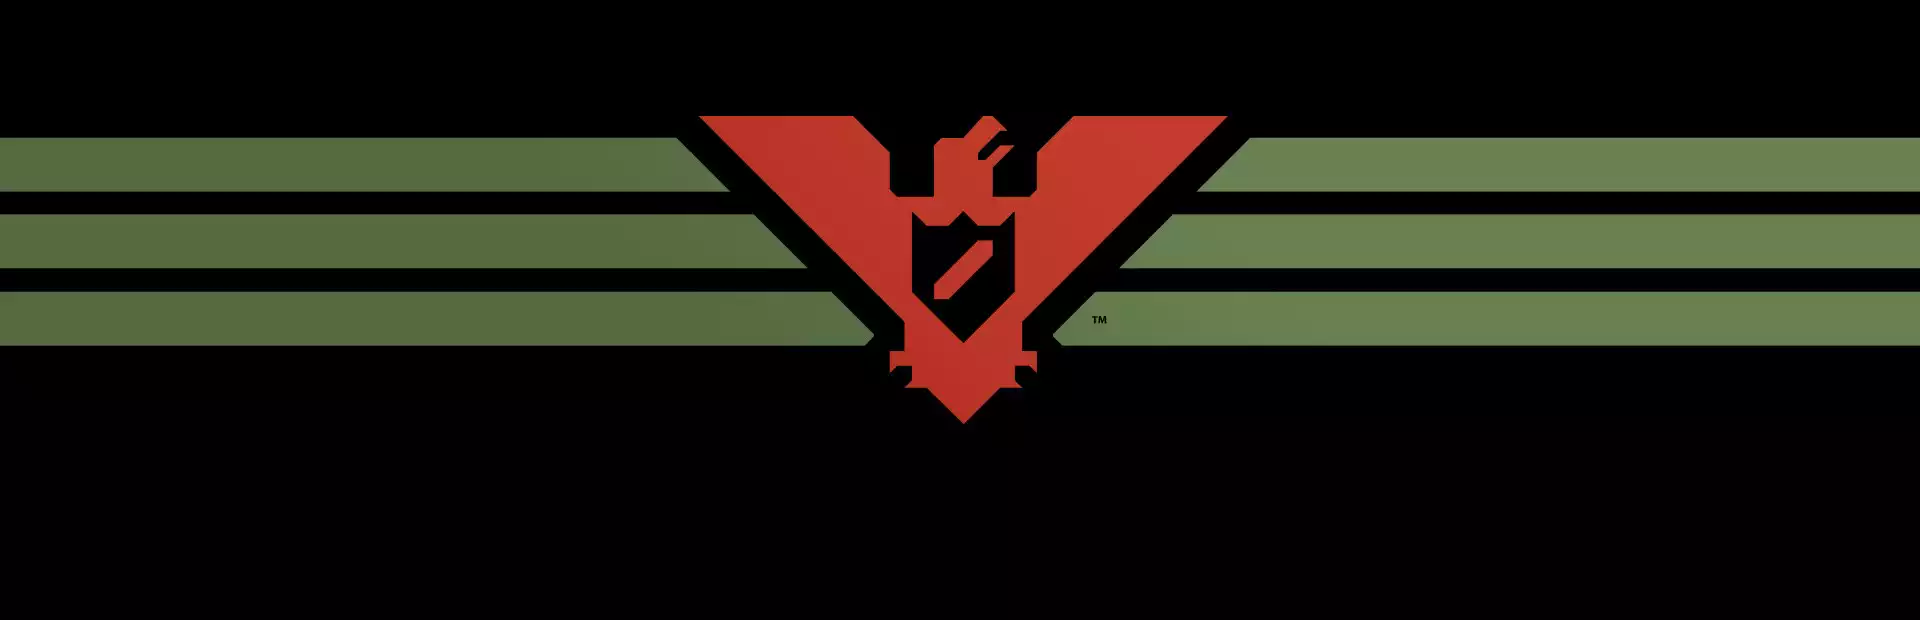 Papers, Please Steam Key China